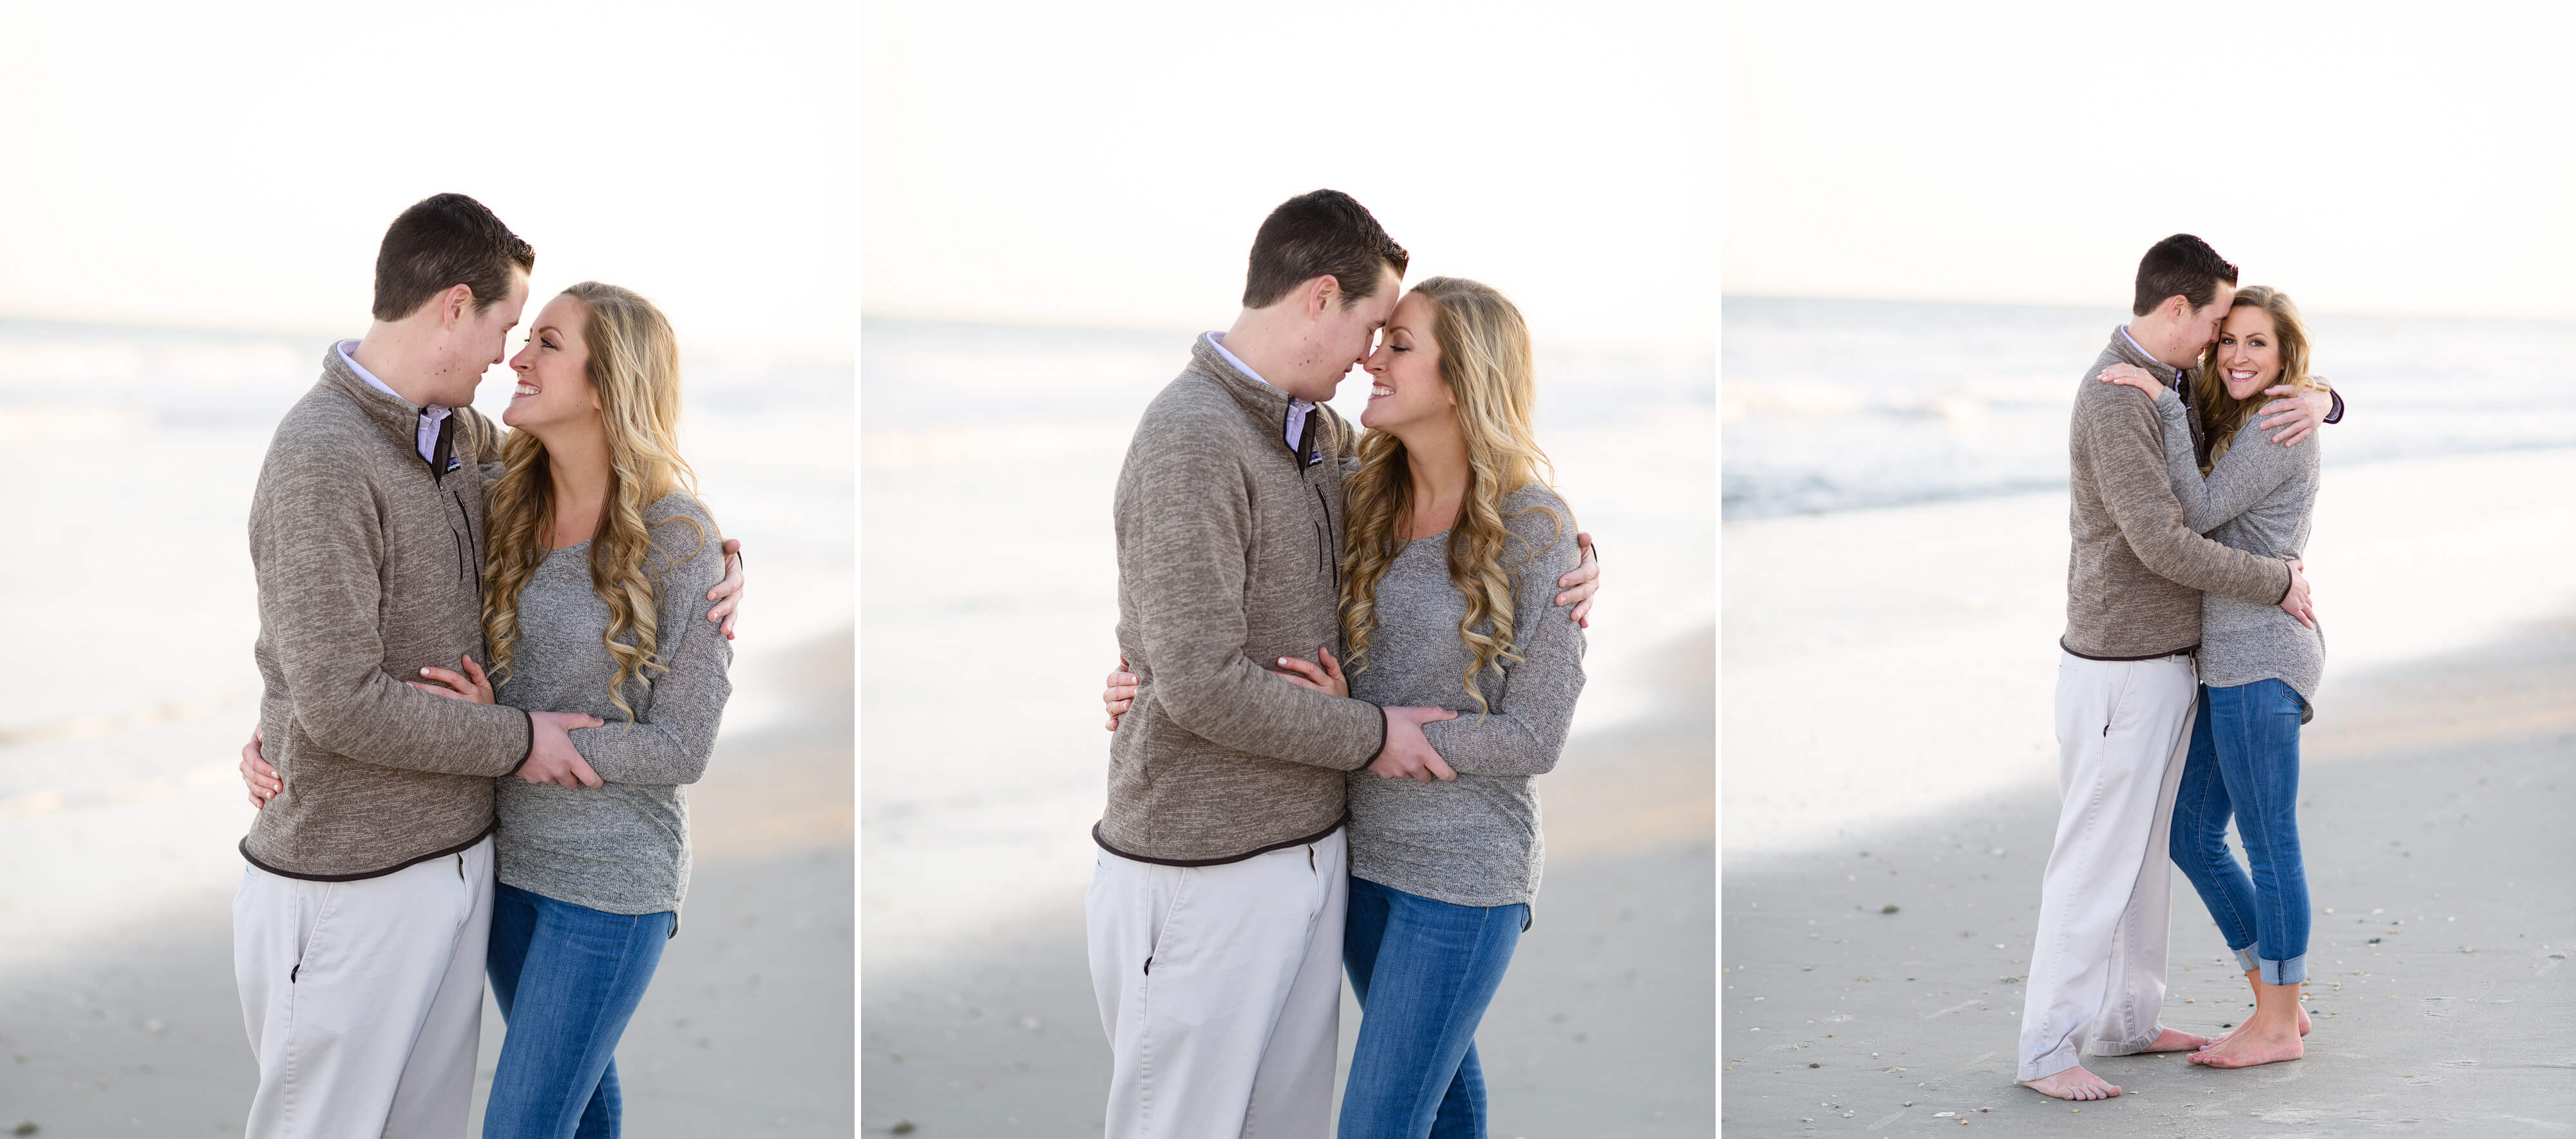 Fun engagement portraits in Garden City and Storyboard 3